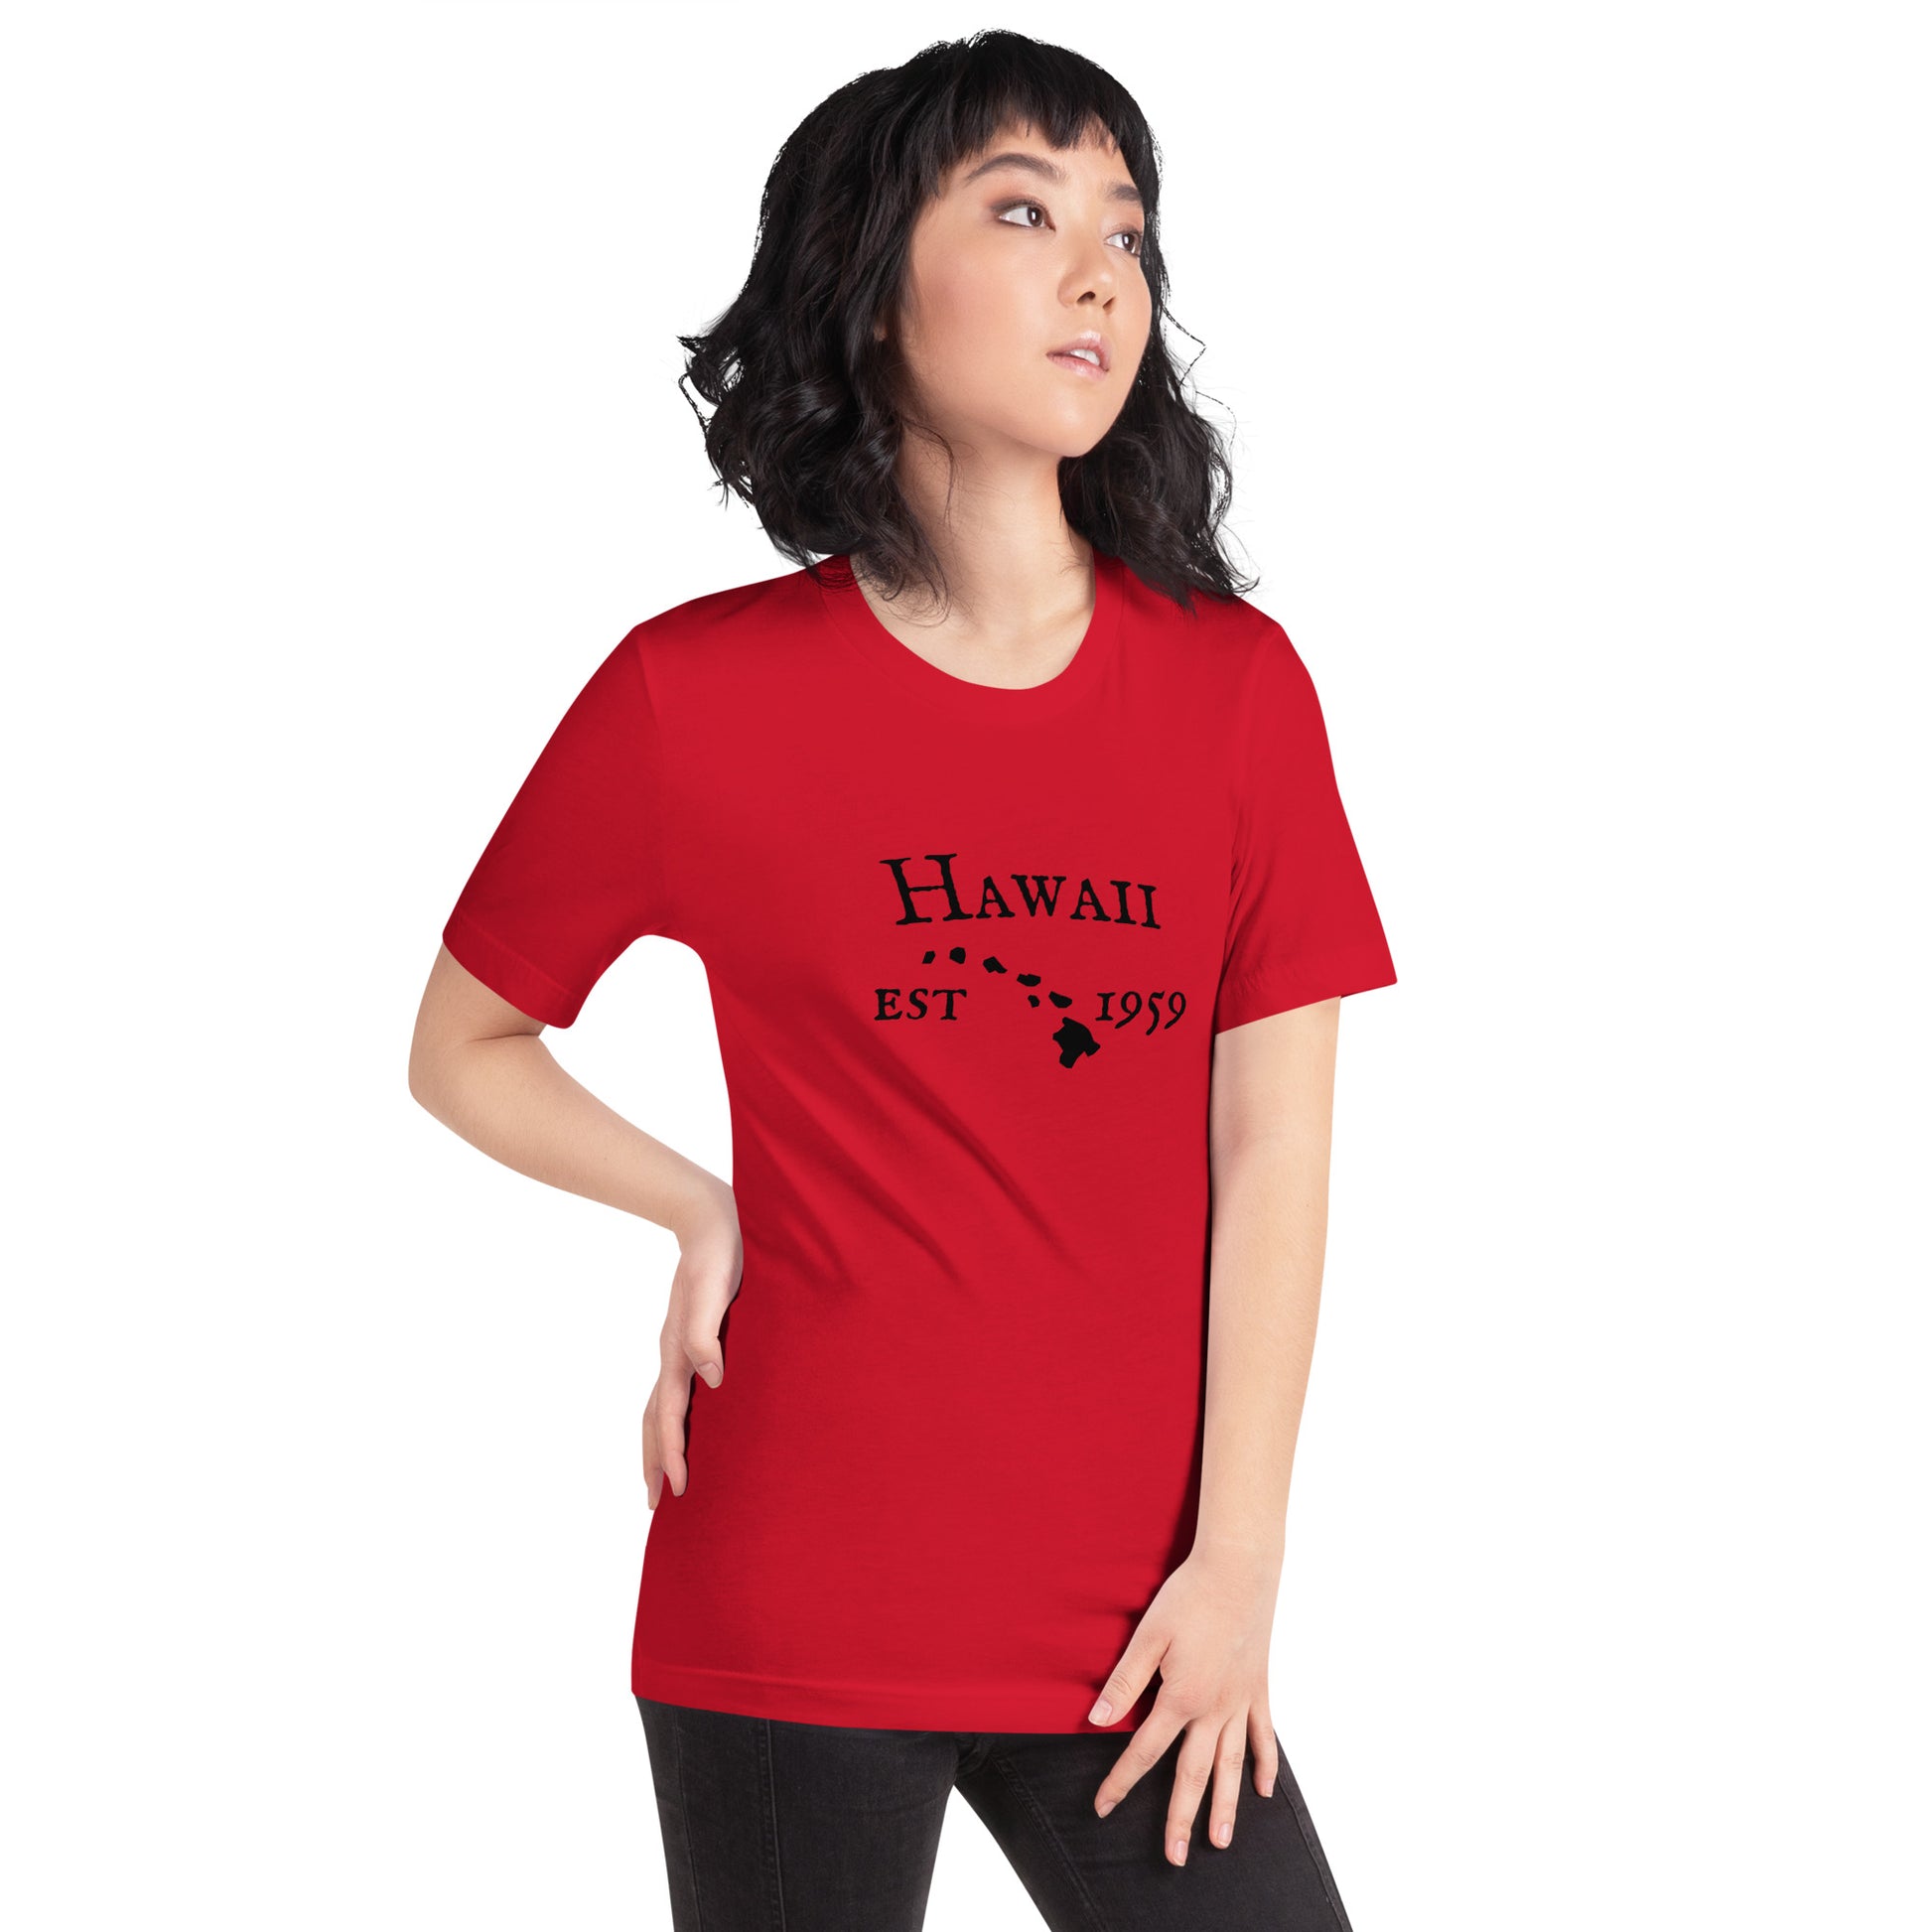 "Hawaii Established In 1959" T-Shirt - Weave Got Gifts - Unique Gifts You Won’t Find Anywhere Else!